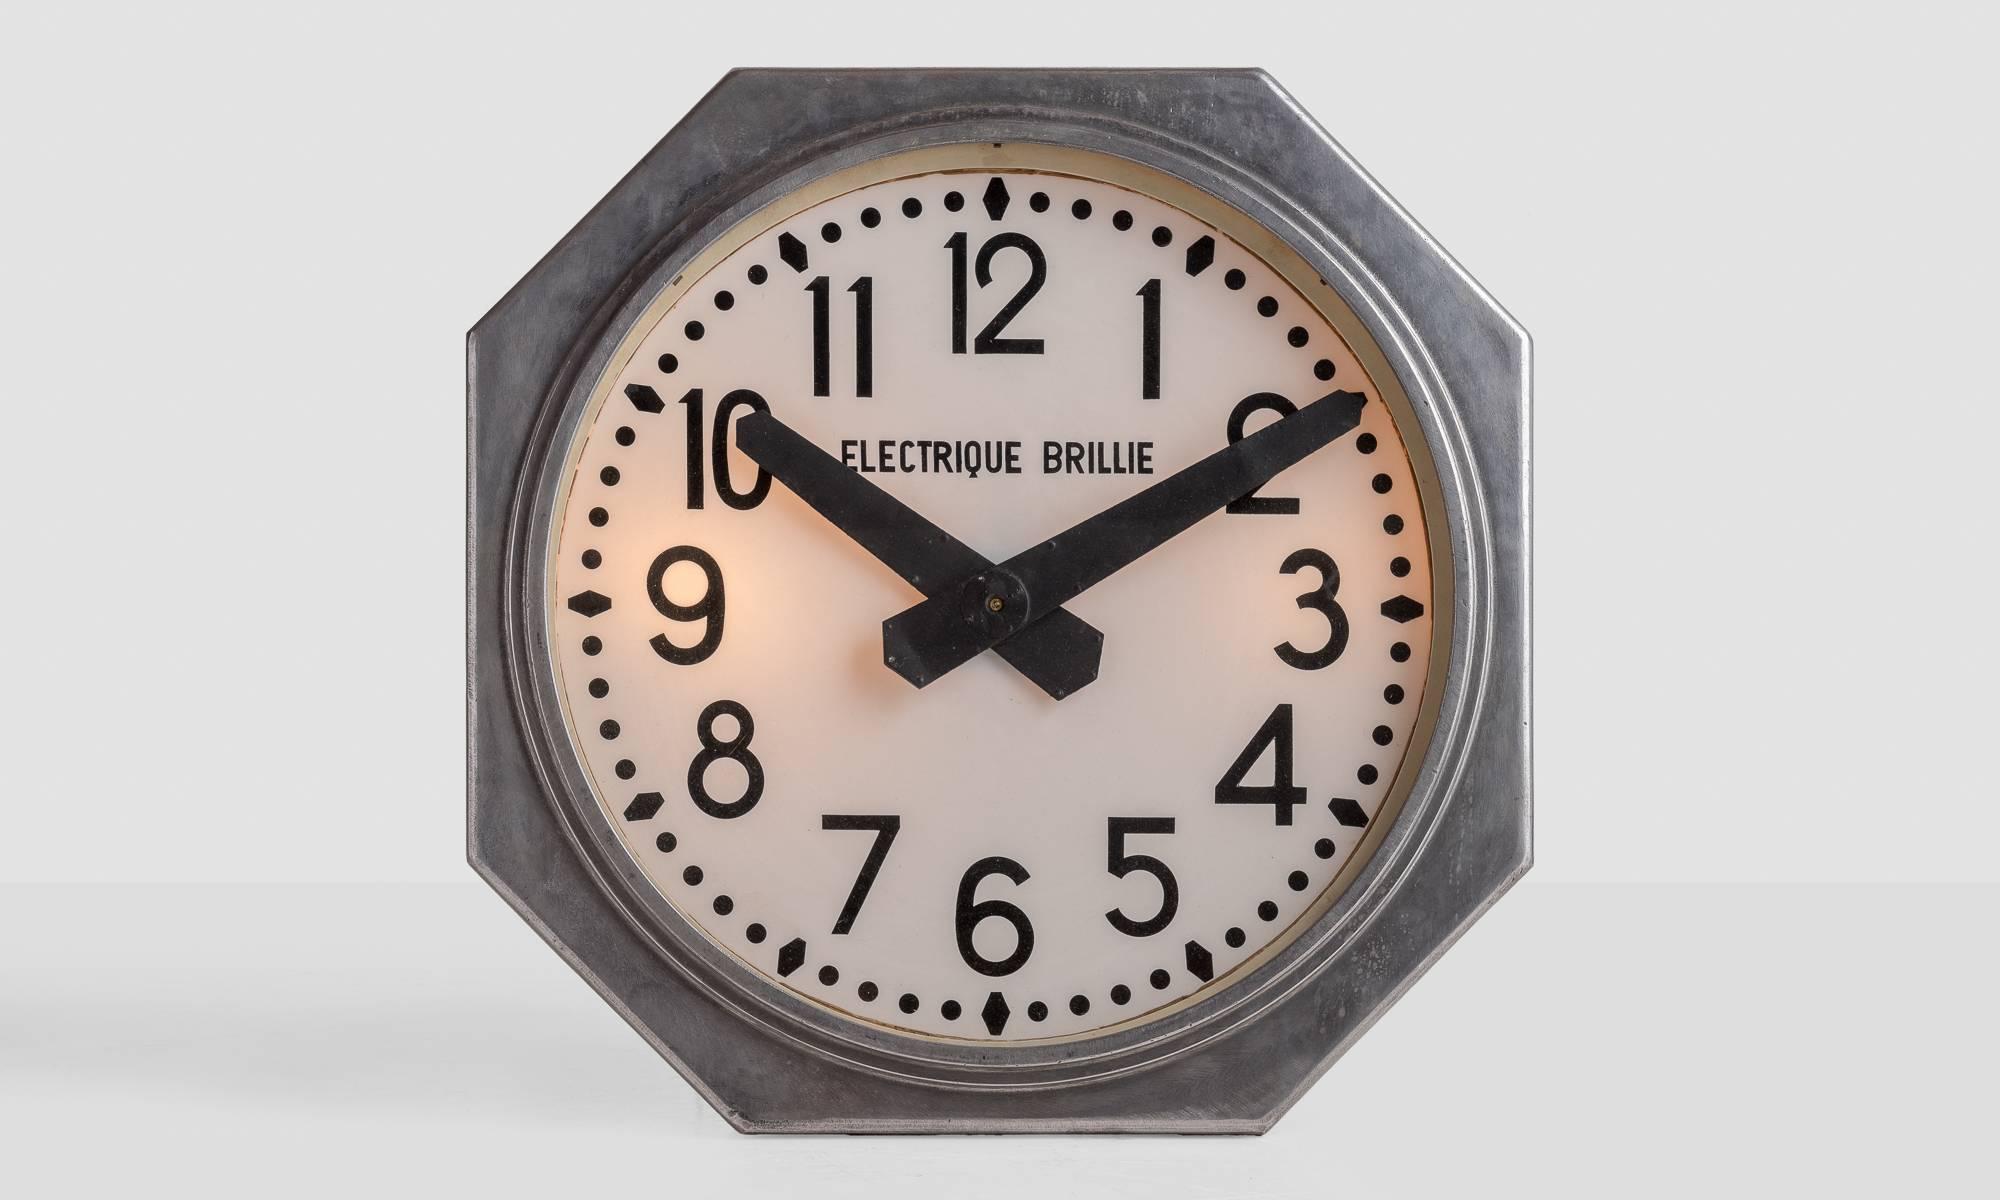 Brillie Electrique railway clock, circa 1950.

Large industrial form in beautifully patinated aluminium with hand-painted numbers and opaline glass face. Electrically powered and illuminated by light set behind clock face.